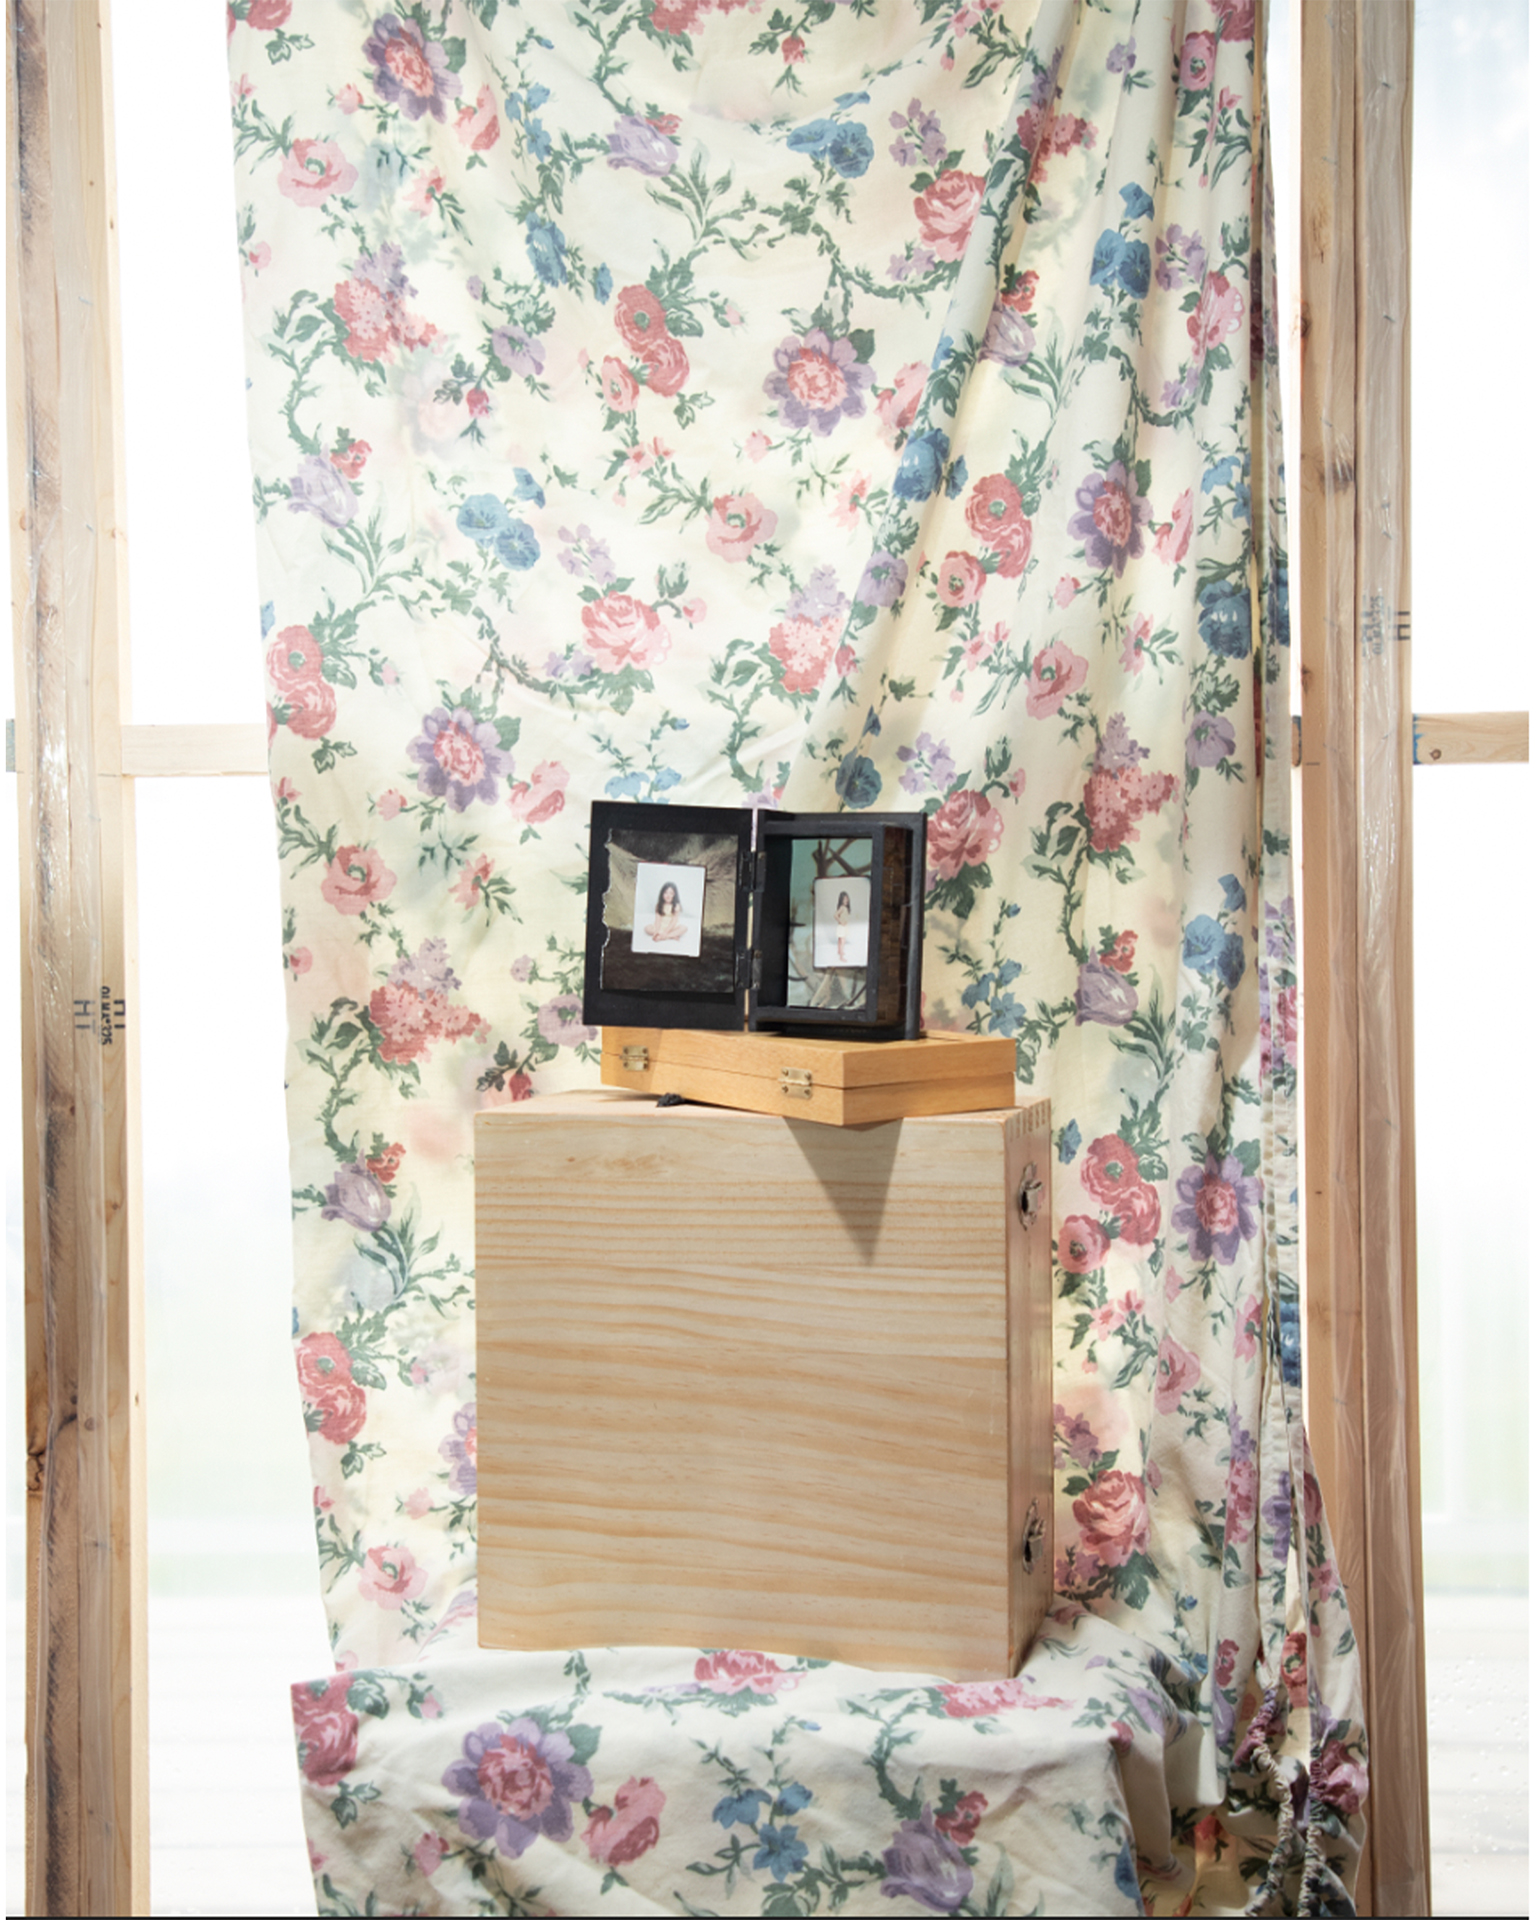 Untitled #1: A small box holds two archival family photos of a young girl. The box sits on a pile of wood in front of a floral sheet, inside a sunroom.